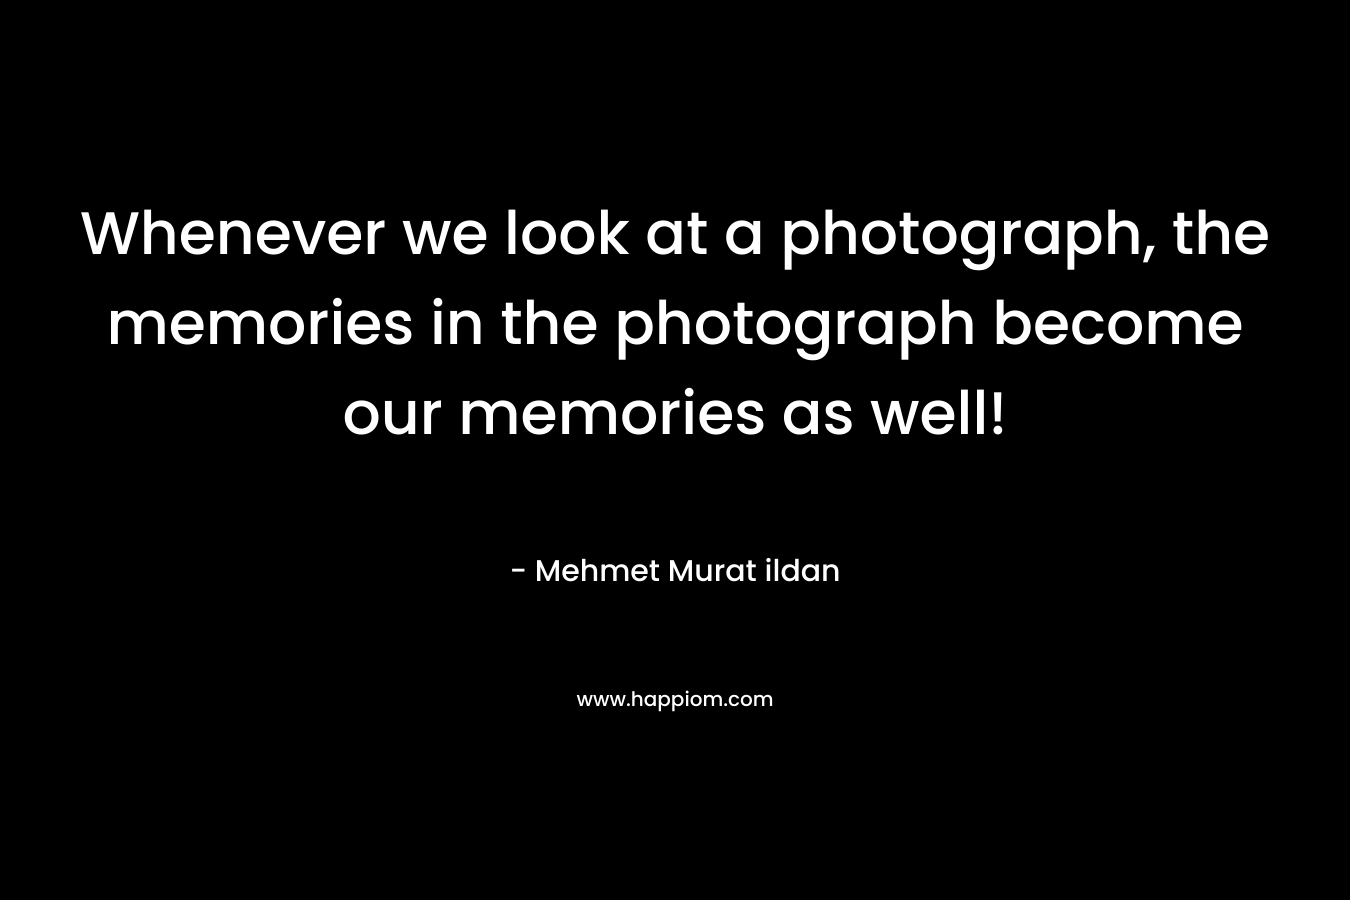 Whenever we look at a photograph, the memories in the photograph become our memories as well!